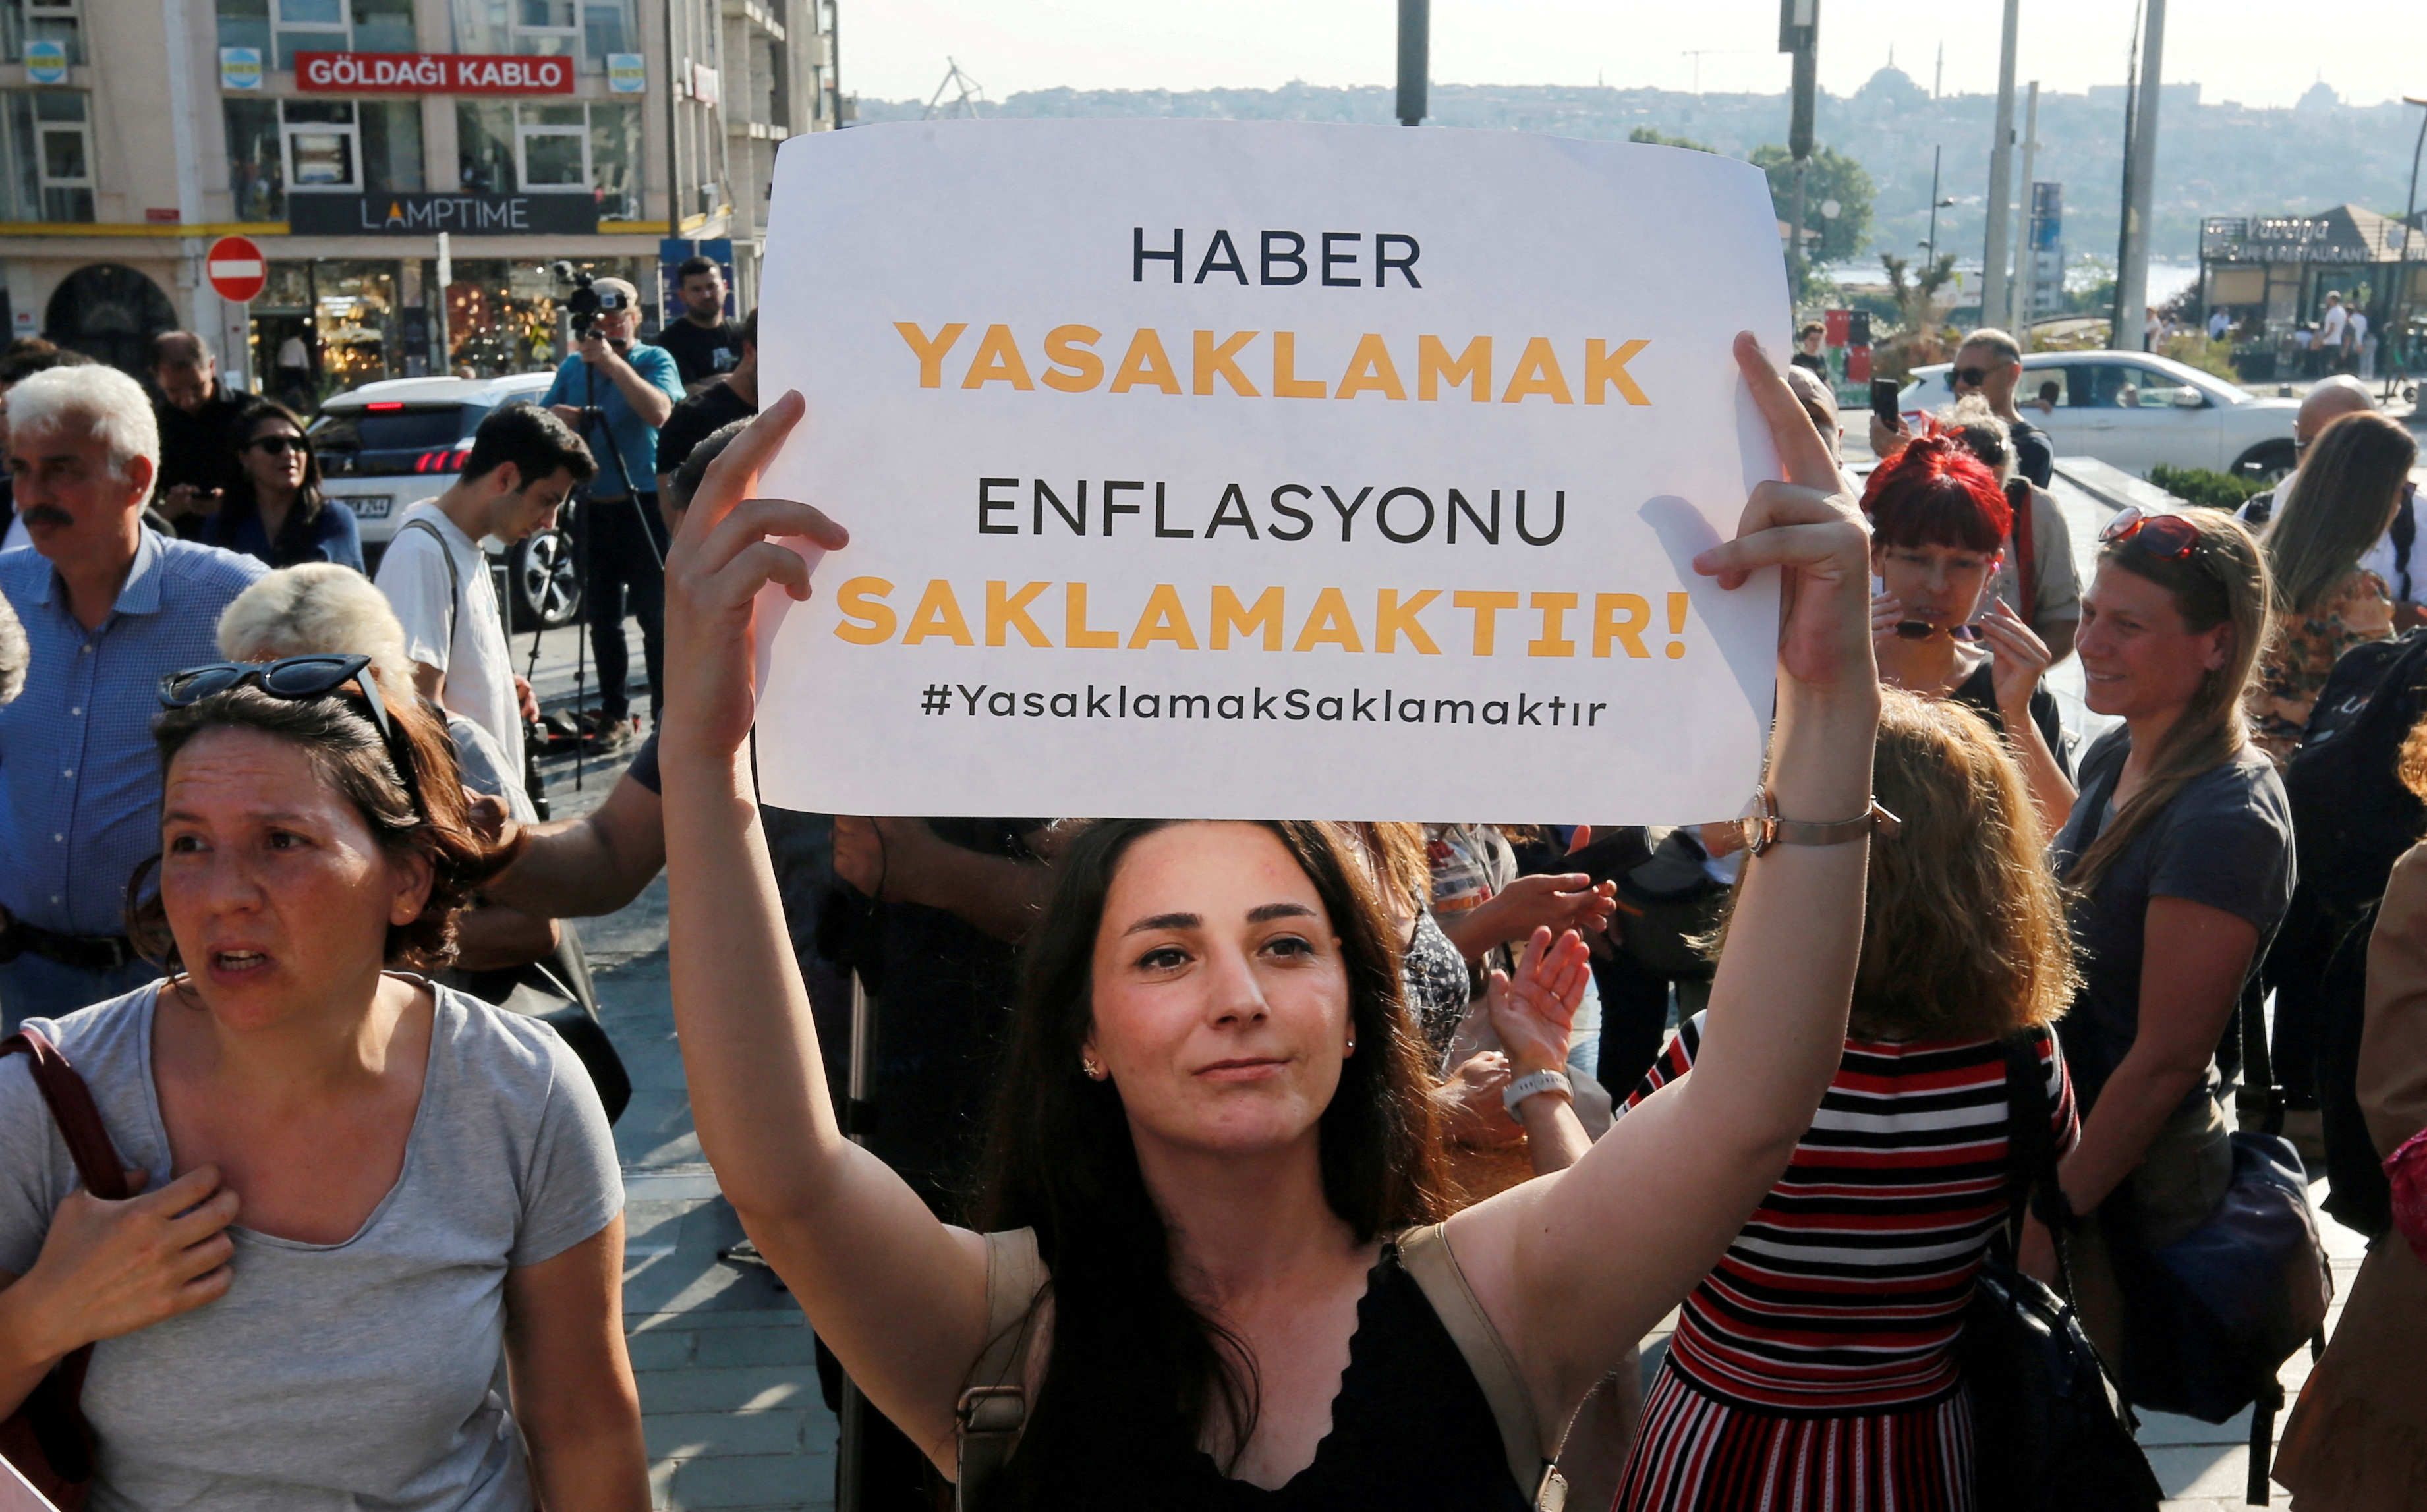 Protesters demonstrate in Istanbul against a media bill